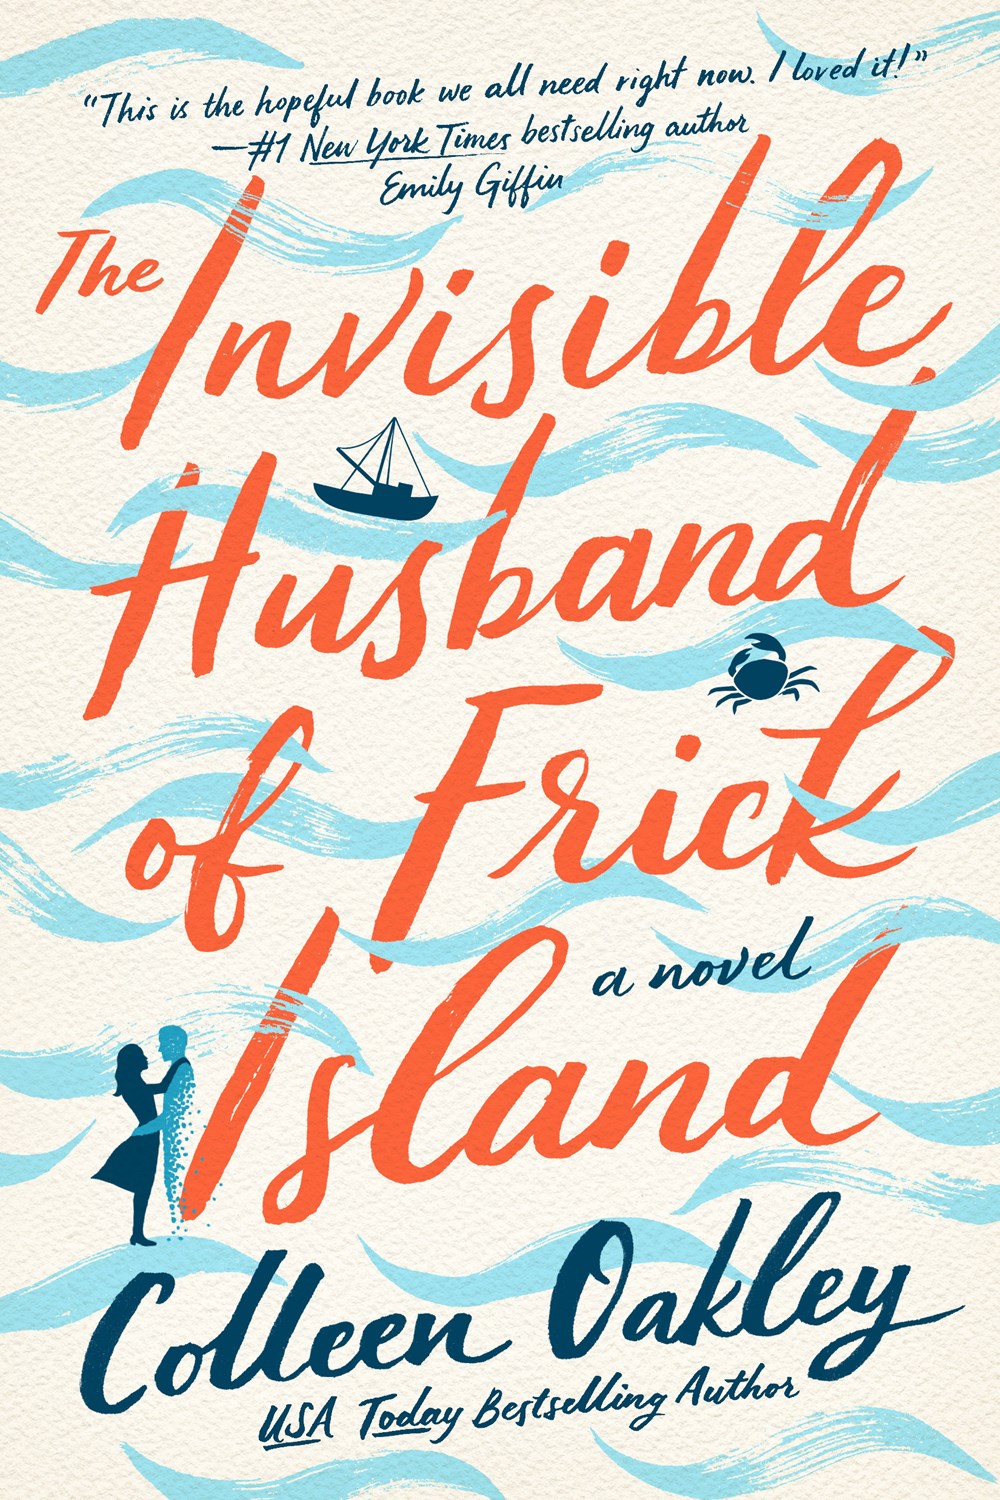 Review: The Invisible Husband of Frick Island by Colleen Oakley